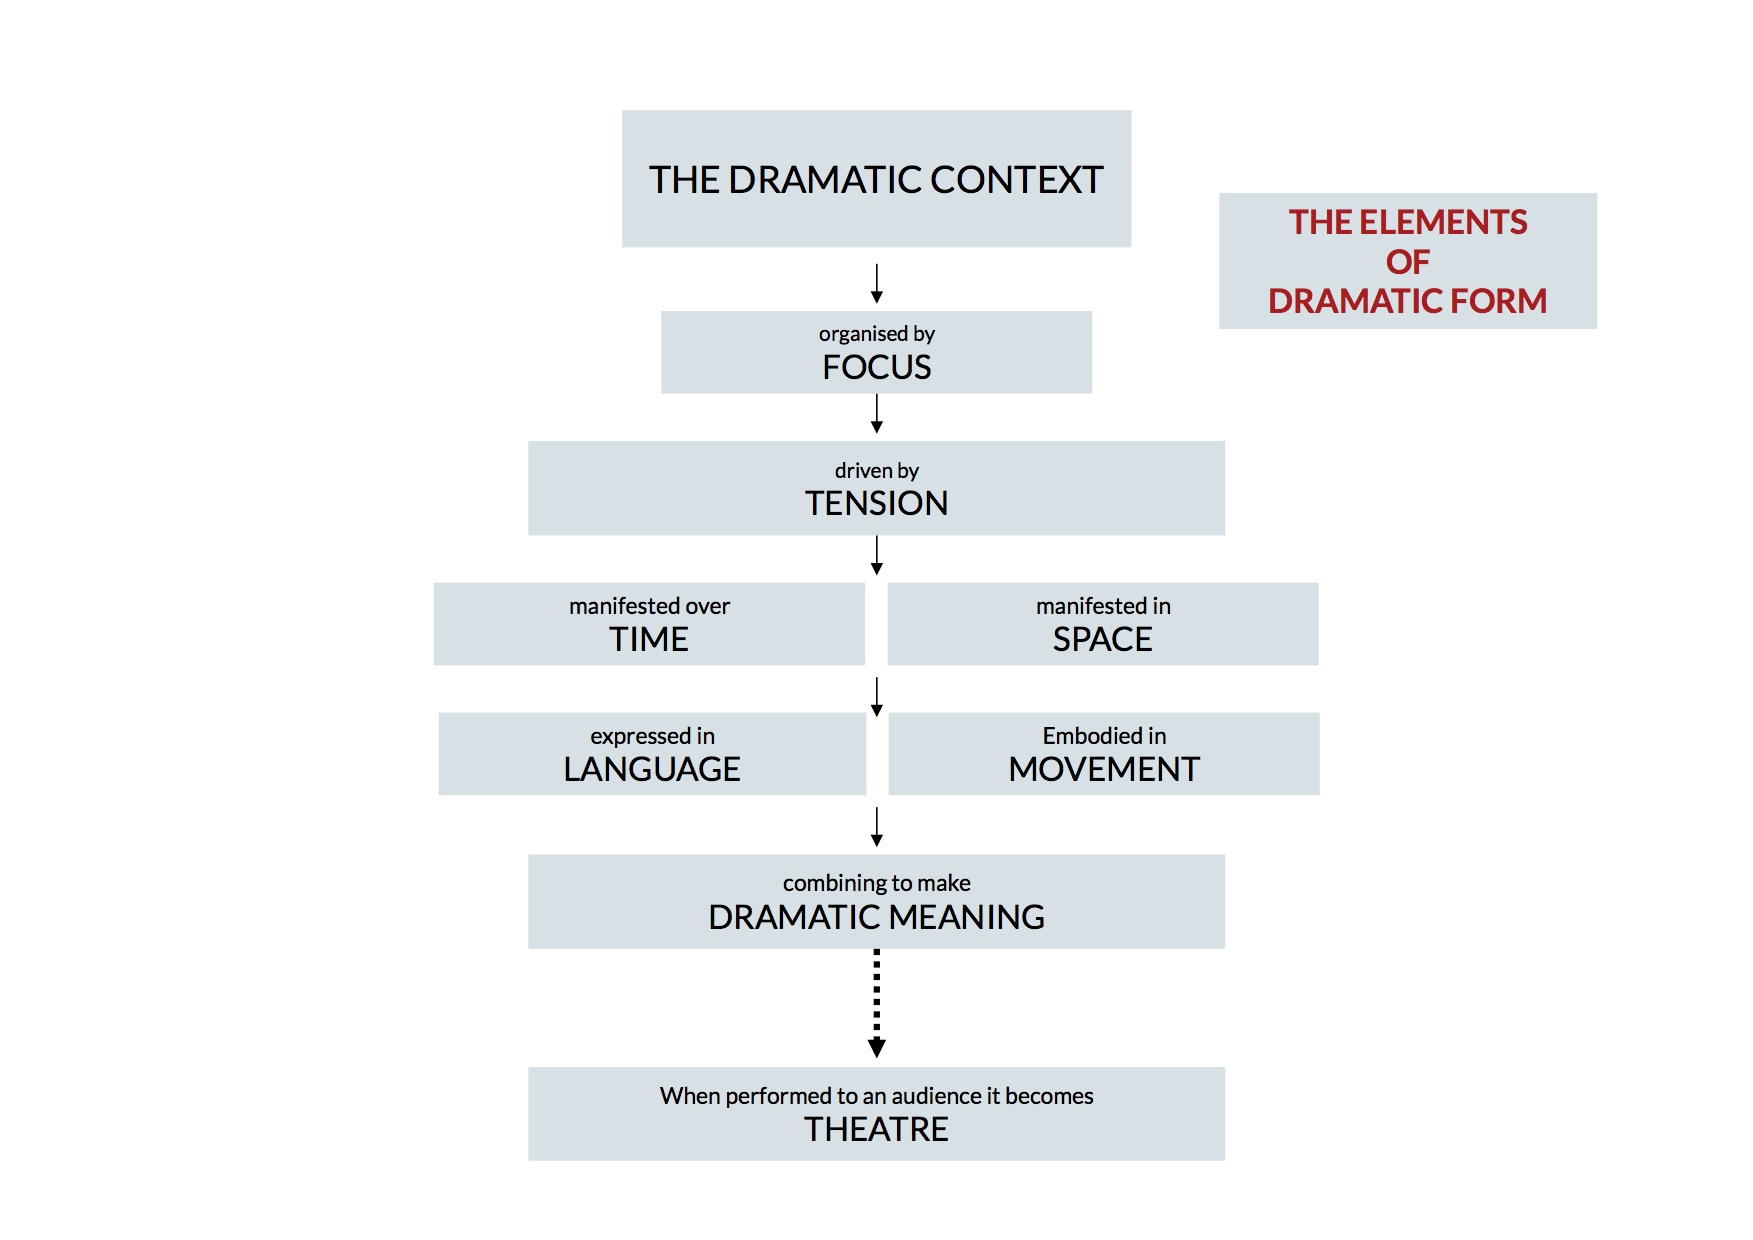 The elements of dramatic form Flow Chart: the dramatic context->organised by Focus->driven by TENSION->manifested over TIME+SPACE->expressed in LANGUAGE+Embodied in MOVEMENT->combining to make DRAMATIC MEANING->when performed to an audience it becomes THEATRE